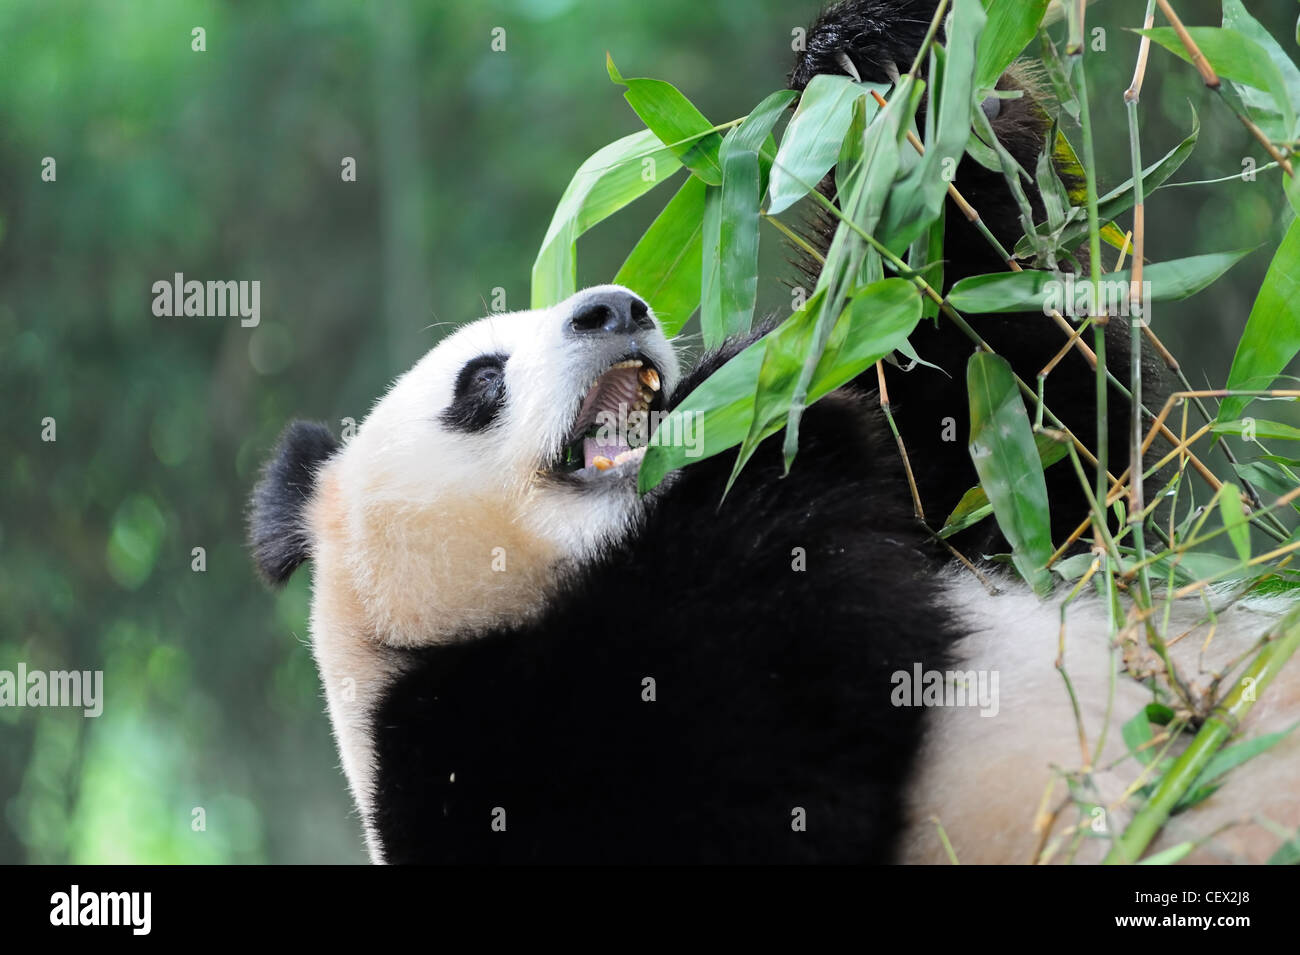 A giant panda lying on the ground and eating bamboo Stock Photo